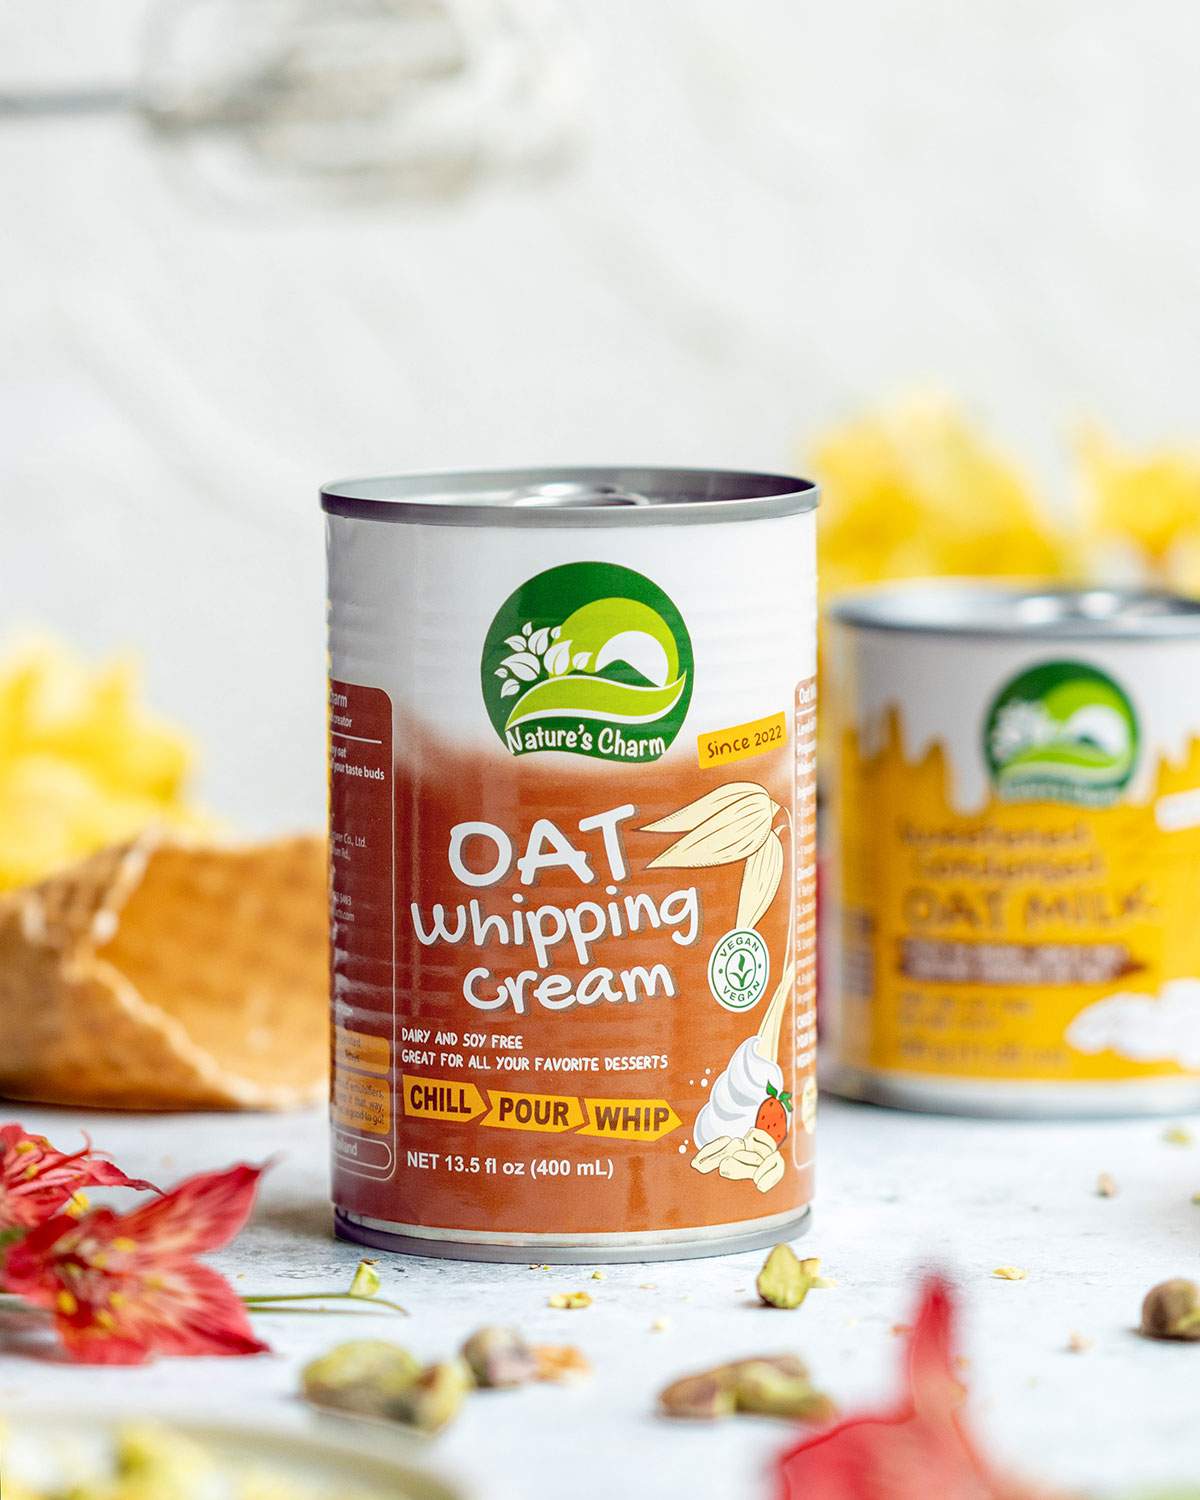 A can of oat whipping cream on a table.